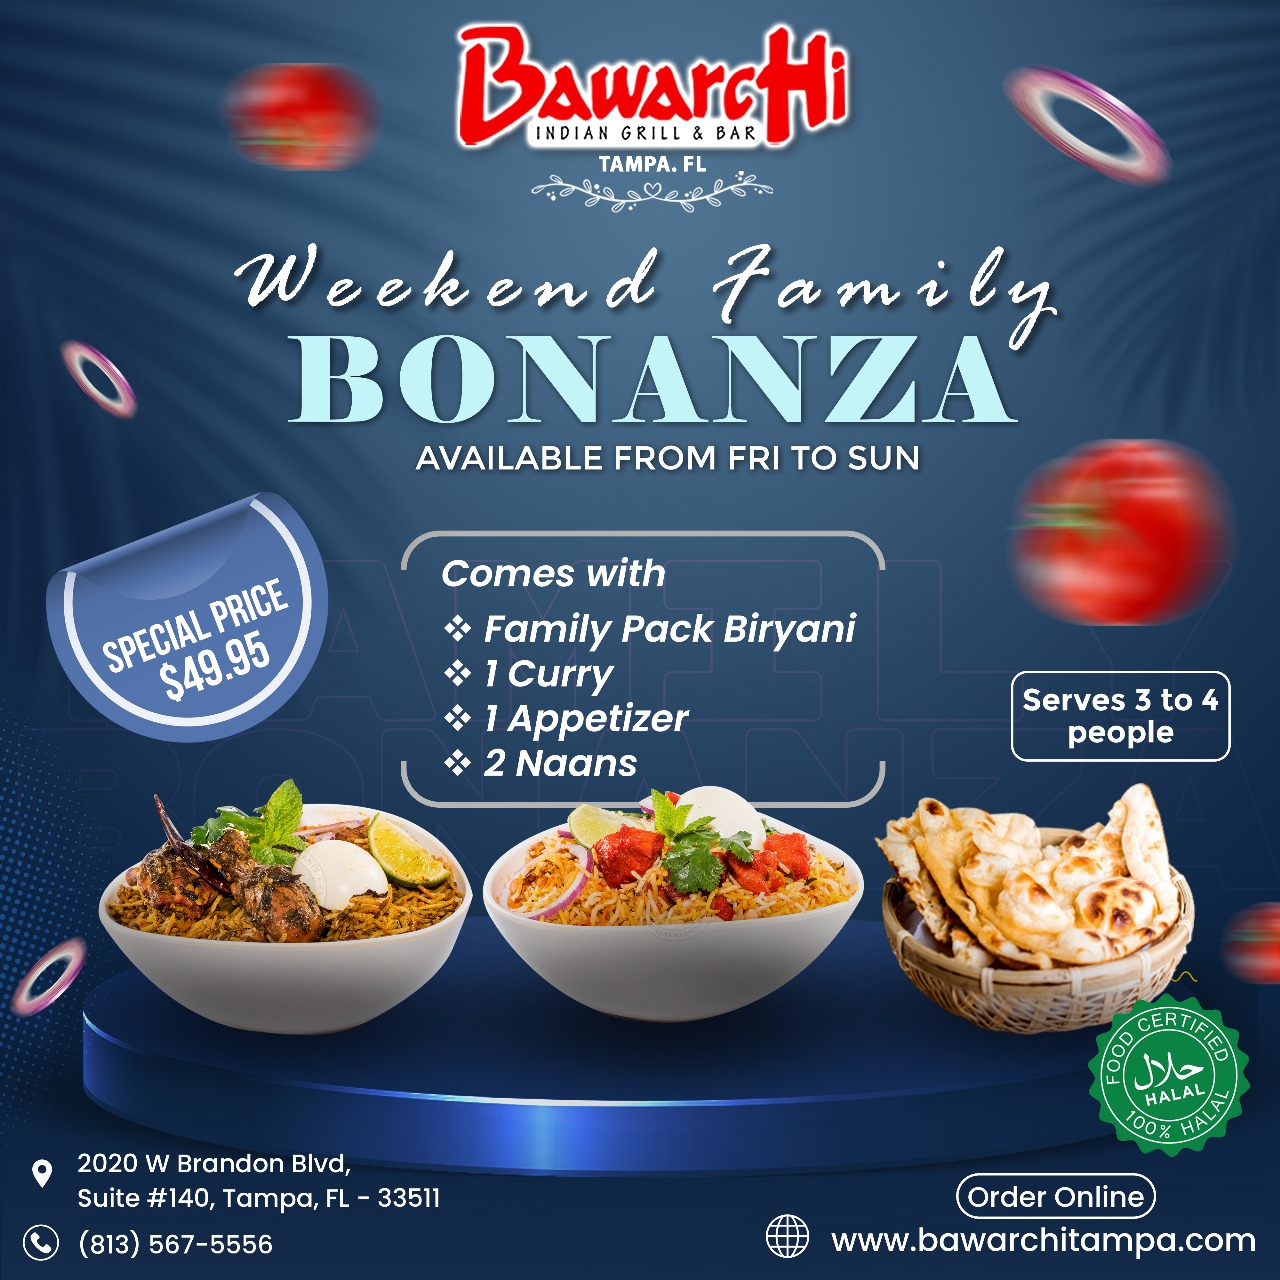  Weekend Family Bonanza Alert! Experience a lavish meal with our exclusive weekend deal! For only $49.95